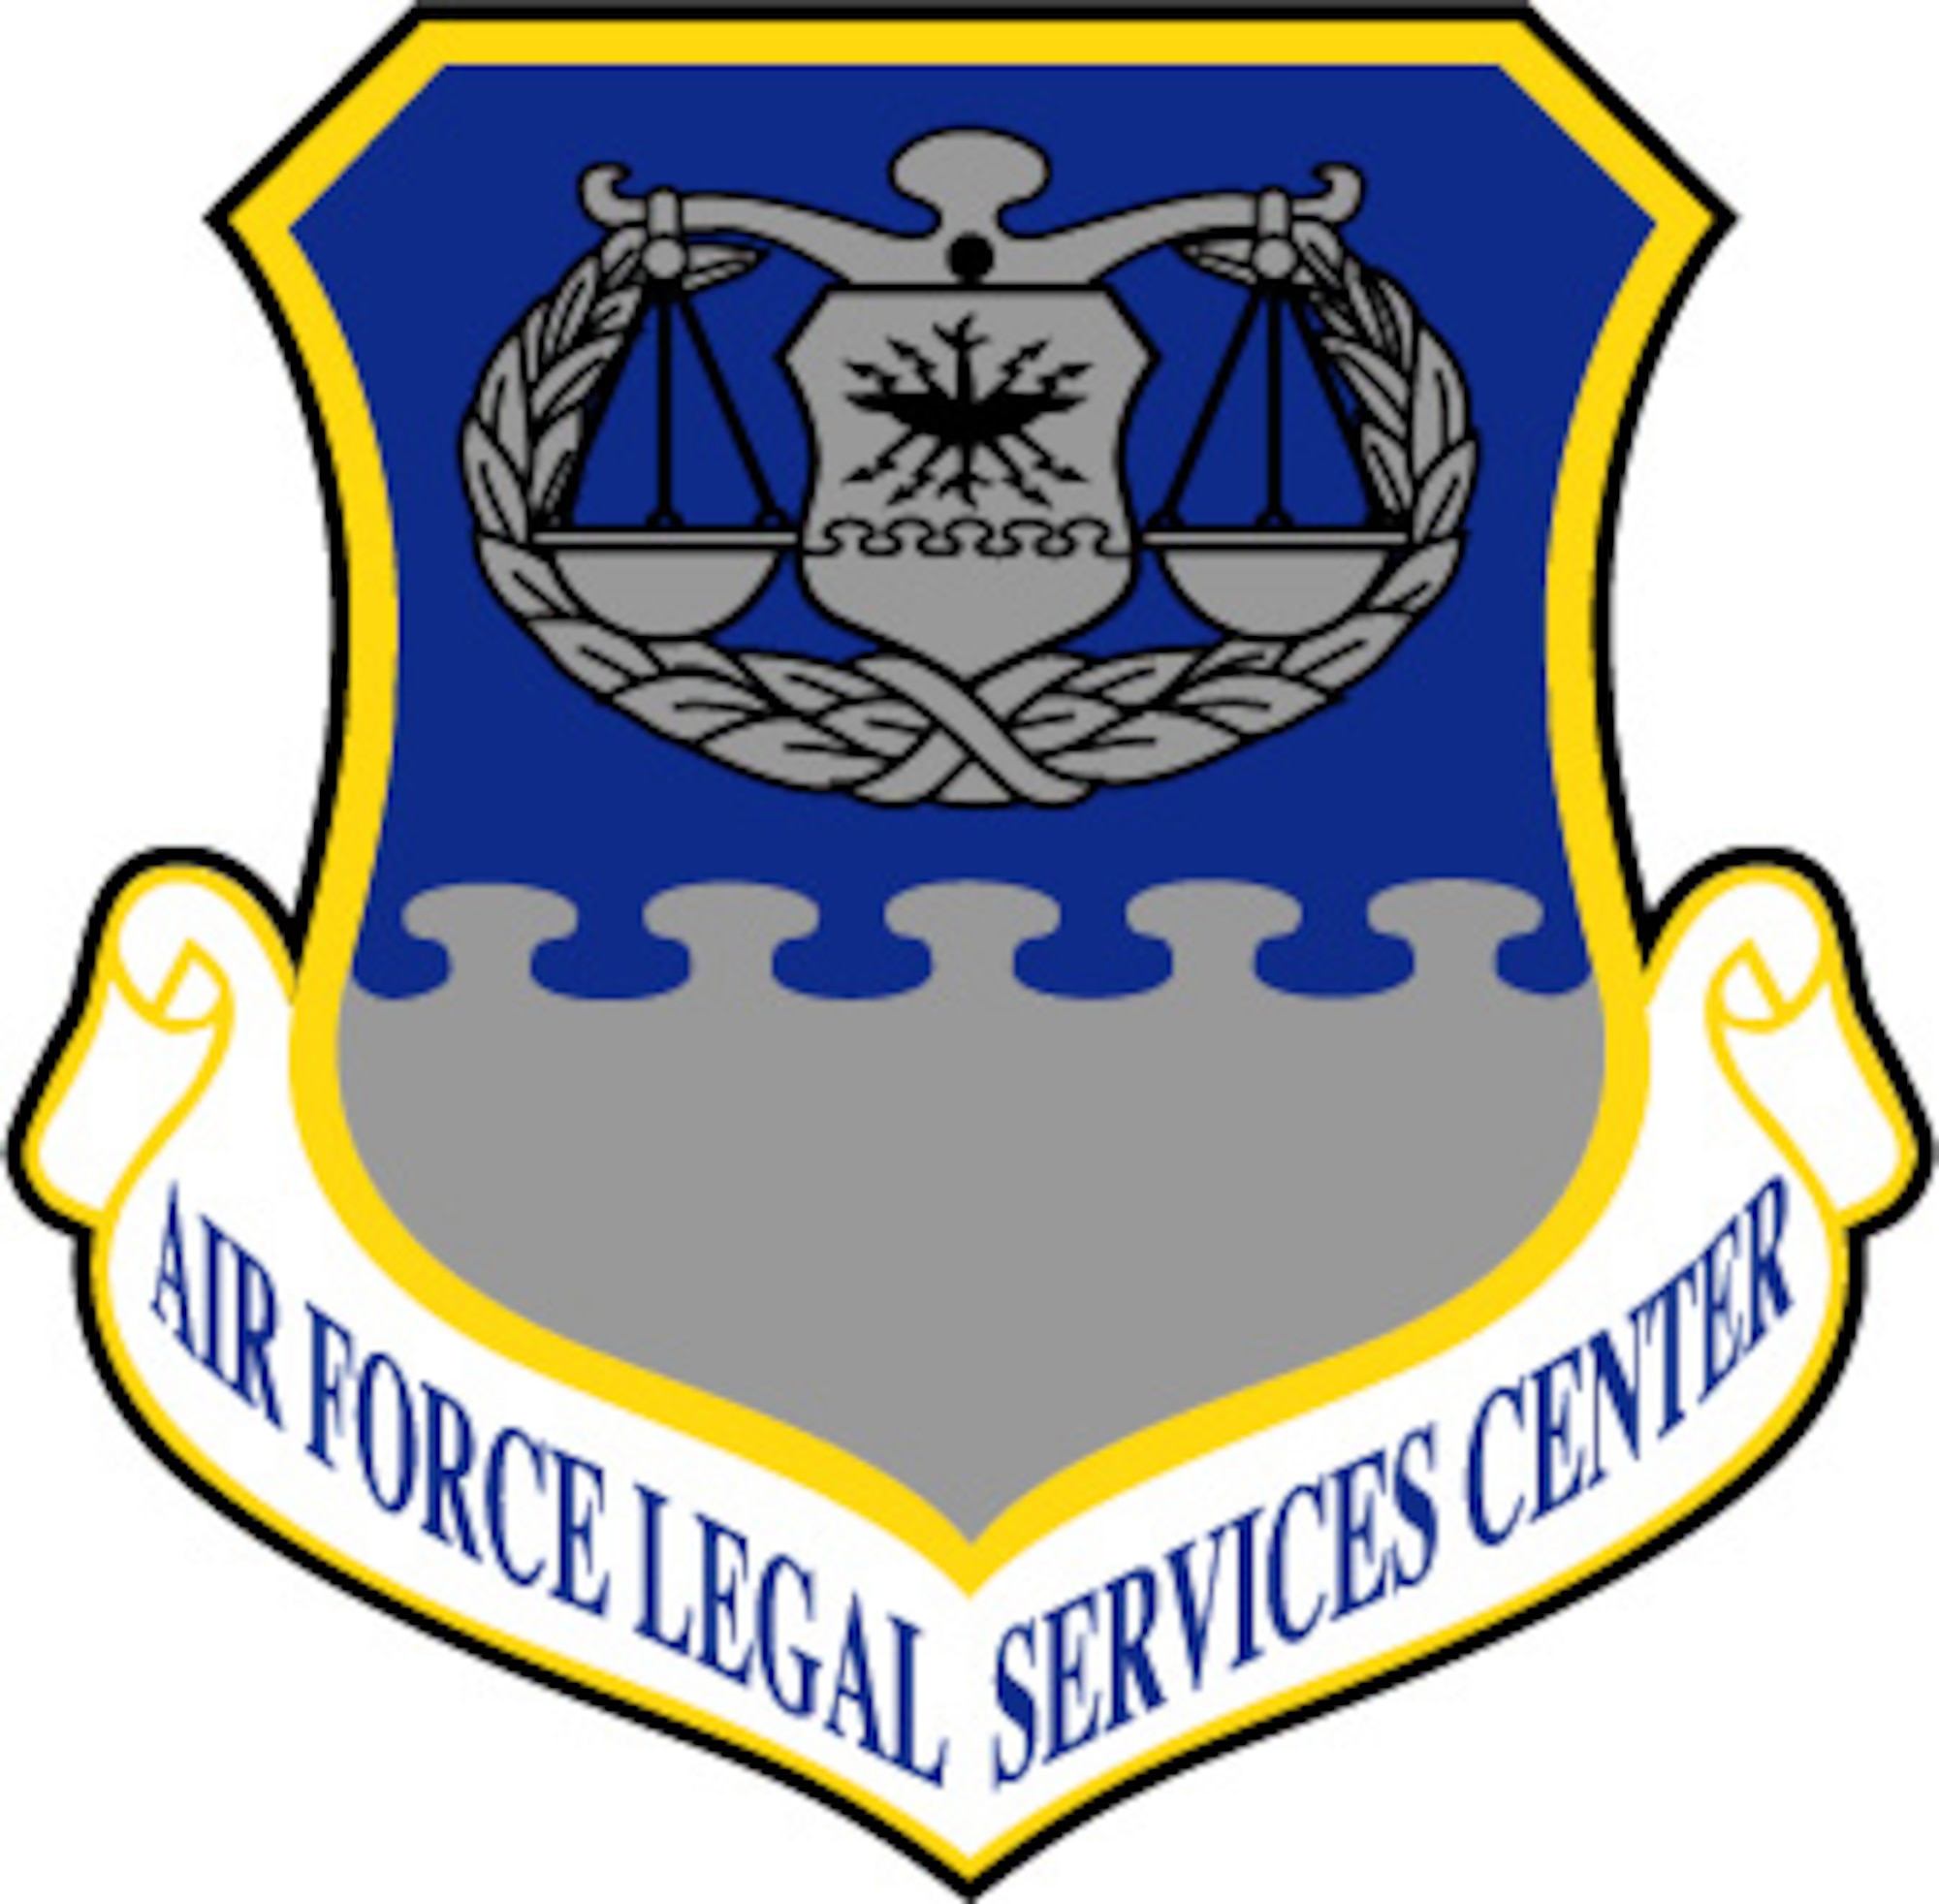 Air Force Legal Services Center shield (retired) -- The Air Force Legal Services Center was renamed the Air Force Legal Services Agency on 1 May 1991 as a result of a reorganization of the The Judge Advocate General's Department (which itself was renamed The Judge Advocate General's Corps in 2003). U.S. Air Force graphic